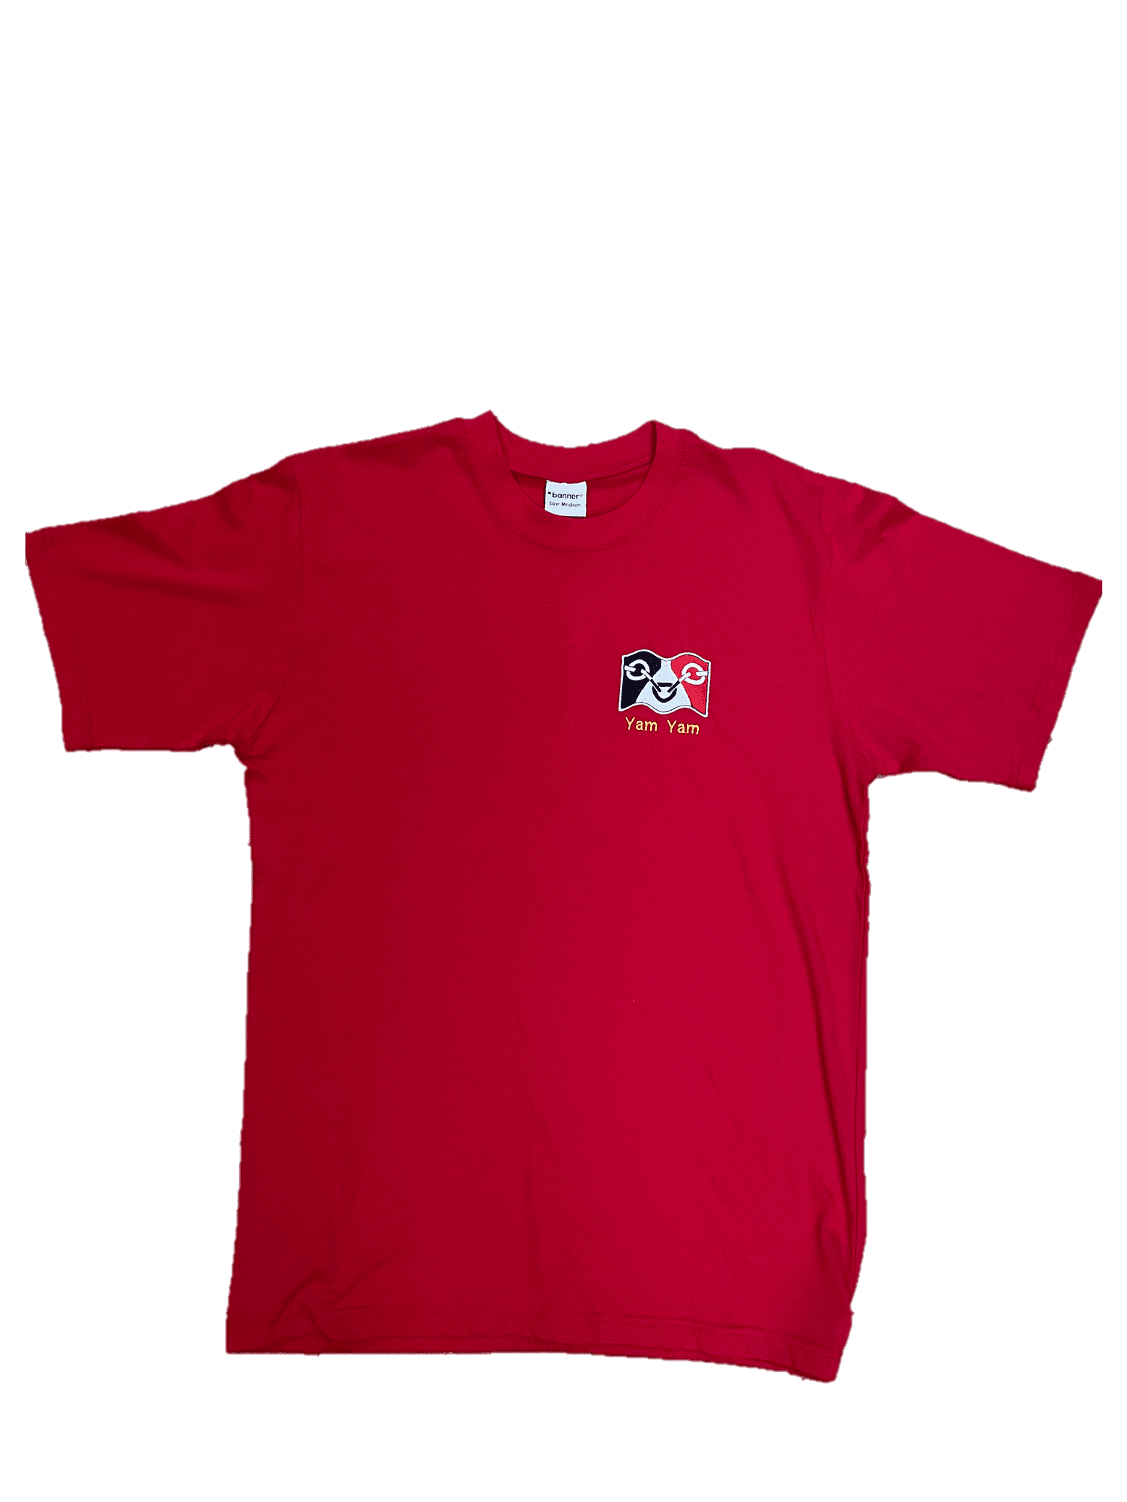 'Yam Yam’ Black Country T-shirt (Unisex) – Red - DANCERS